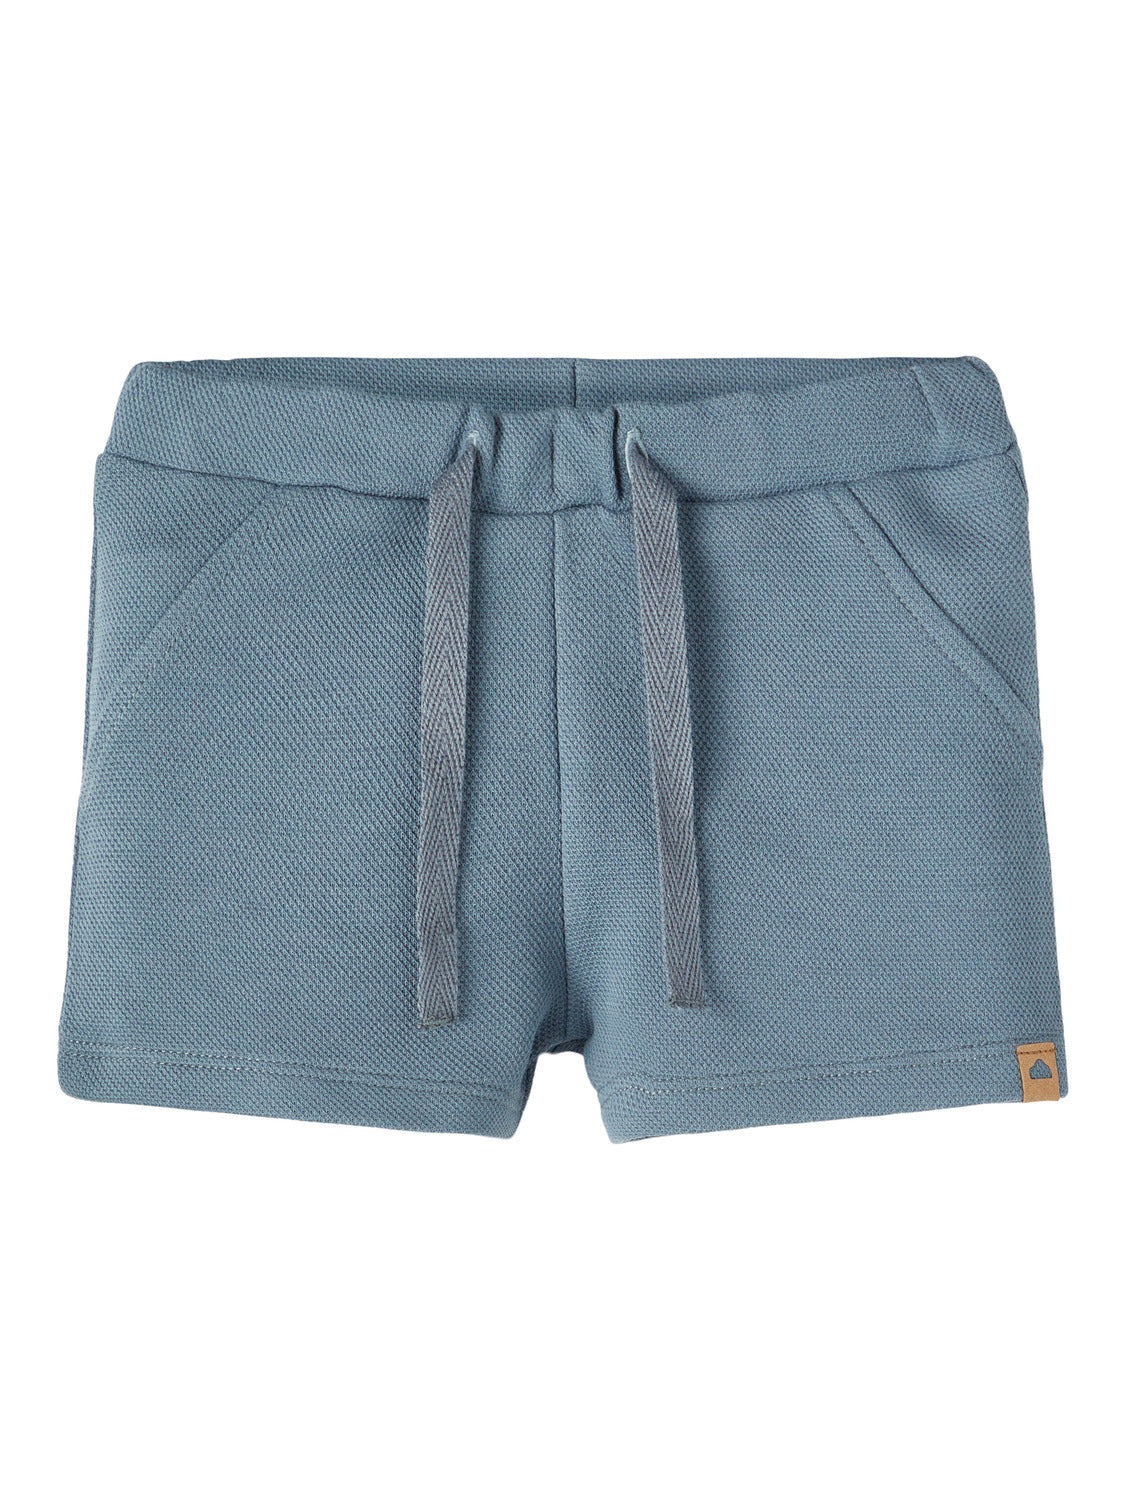 NBMHOLAN Shorts - Stormy Weather